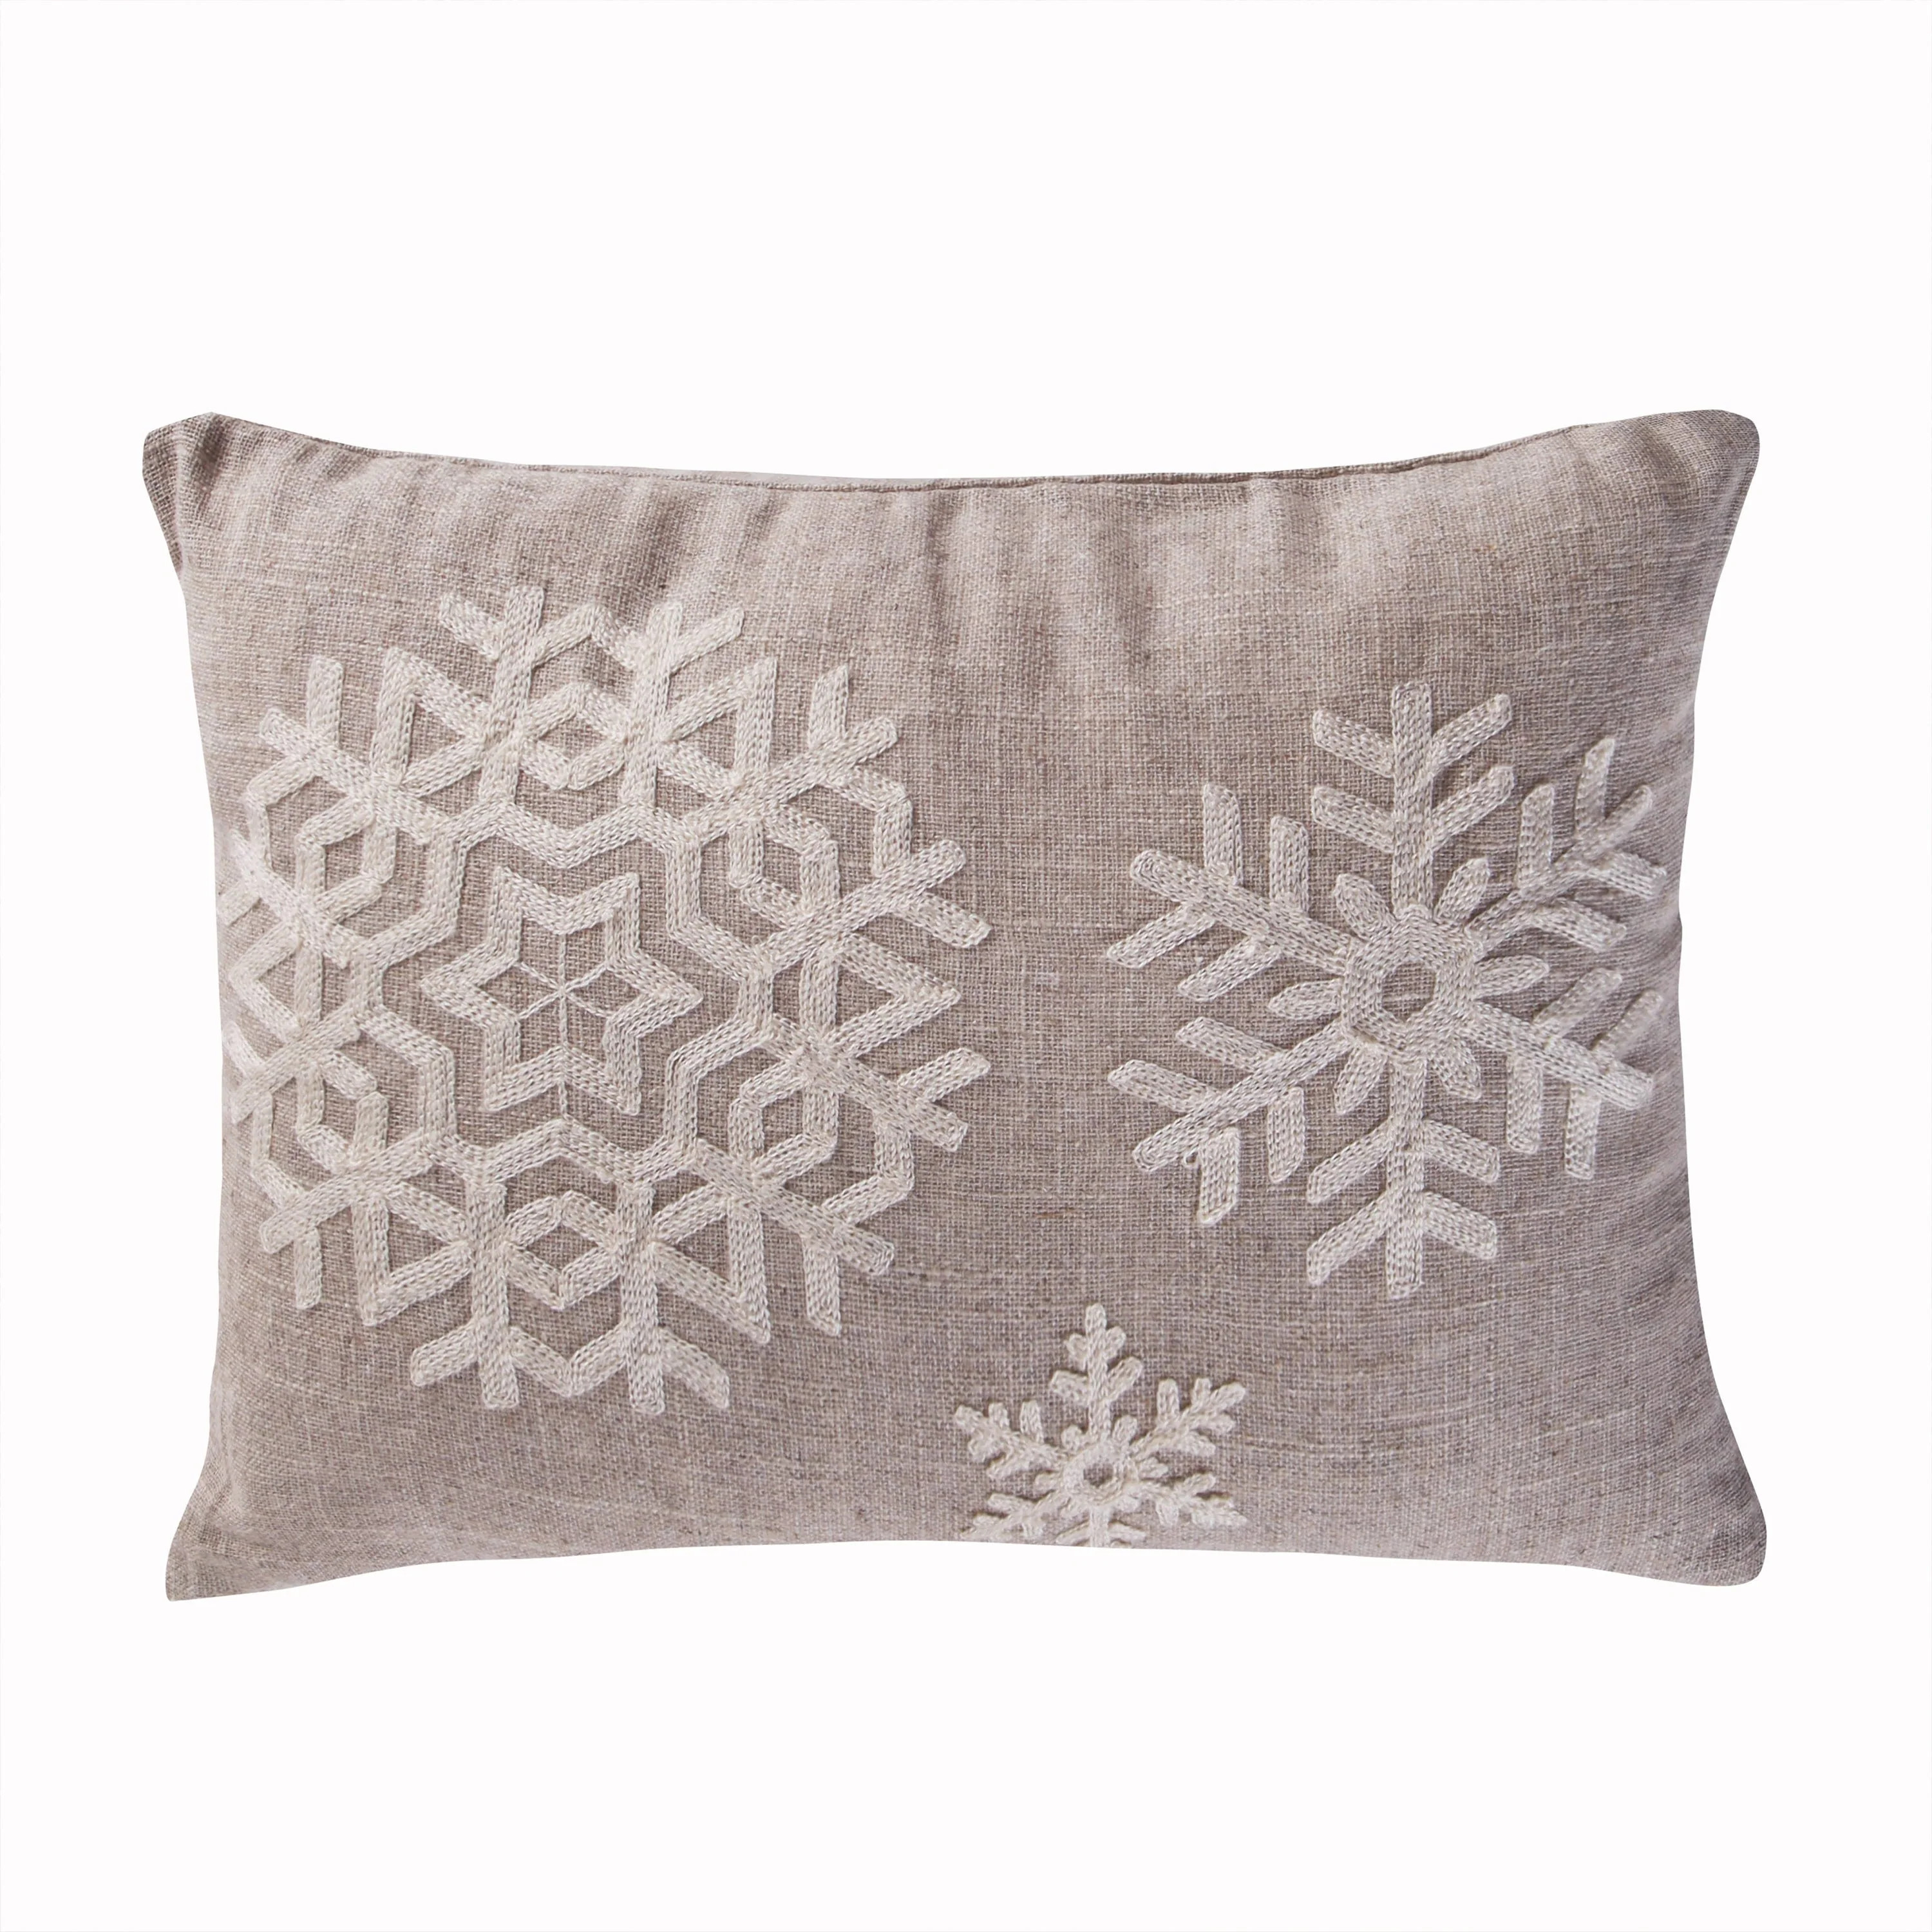 Spruce Snowflake Pillow - 14x18 | Levtex Home